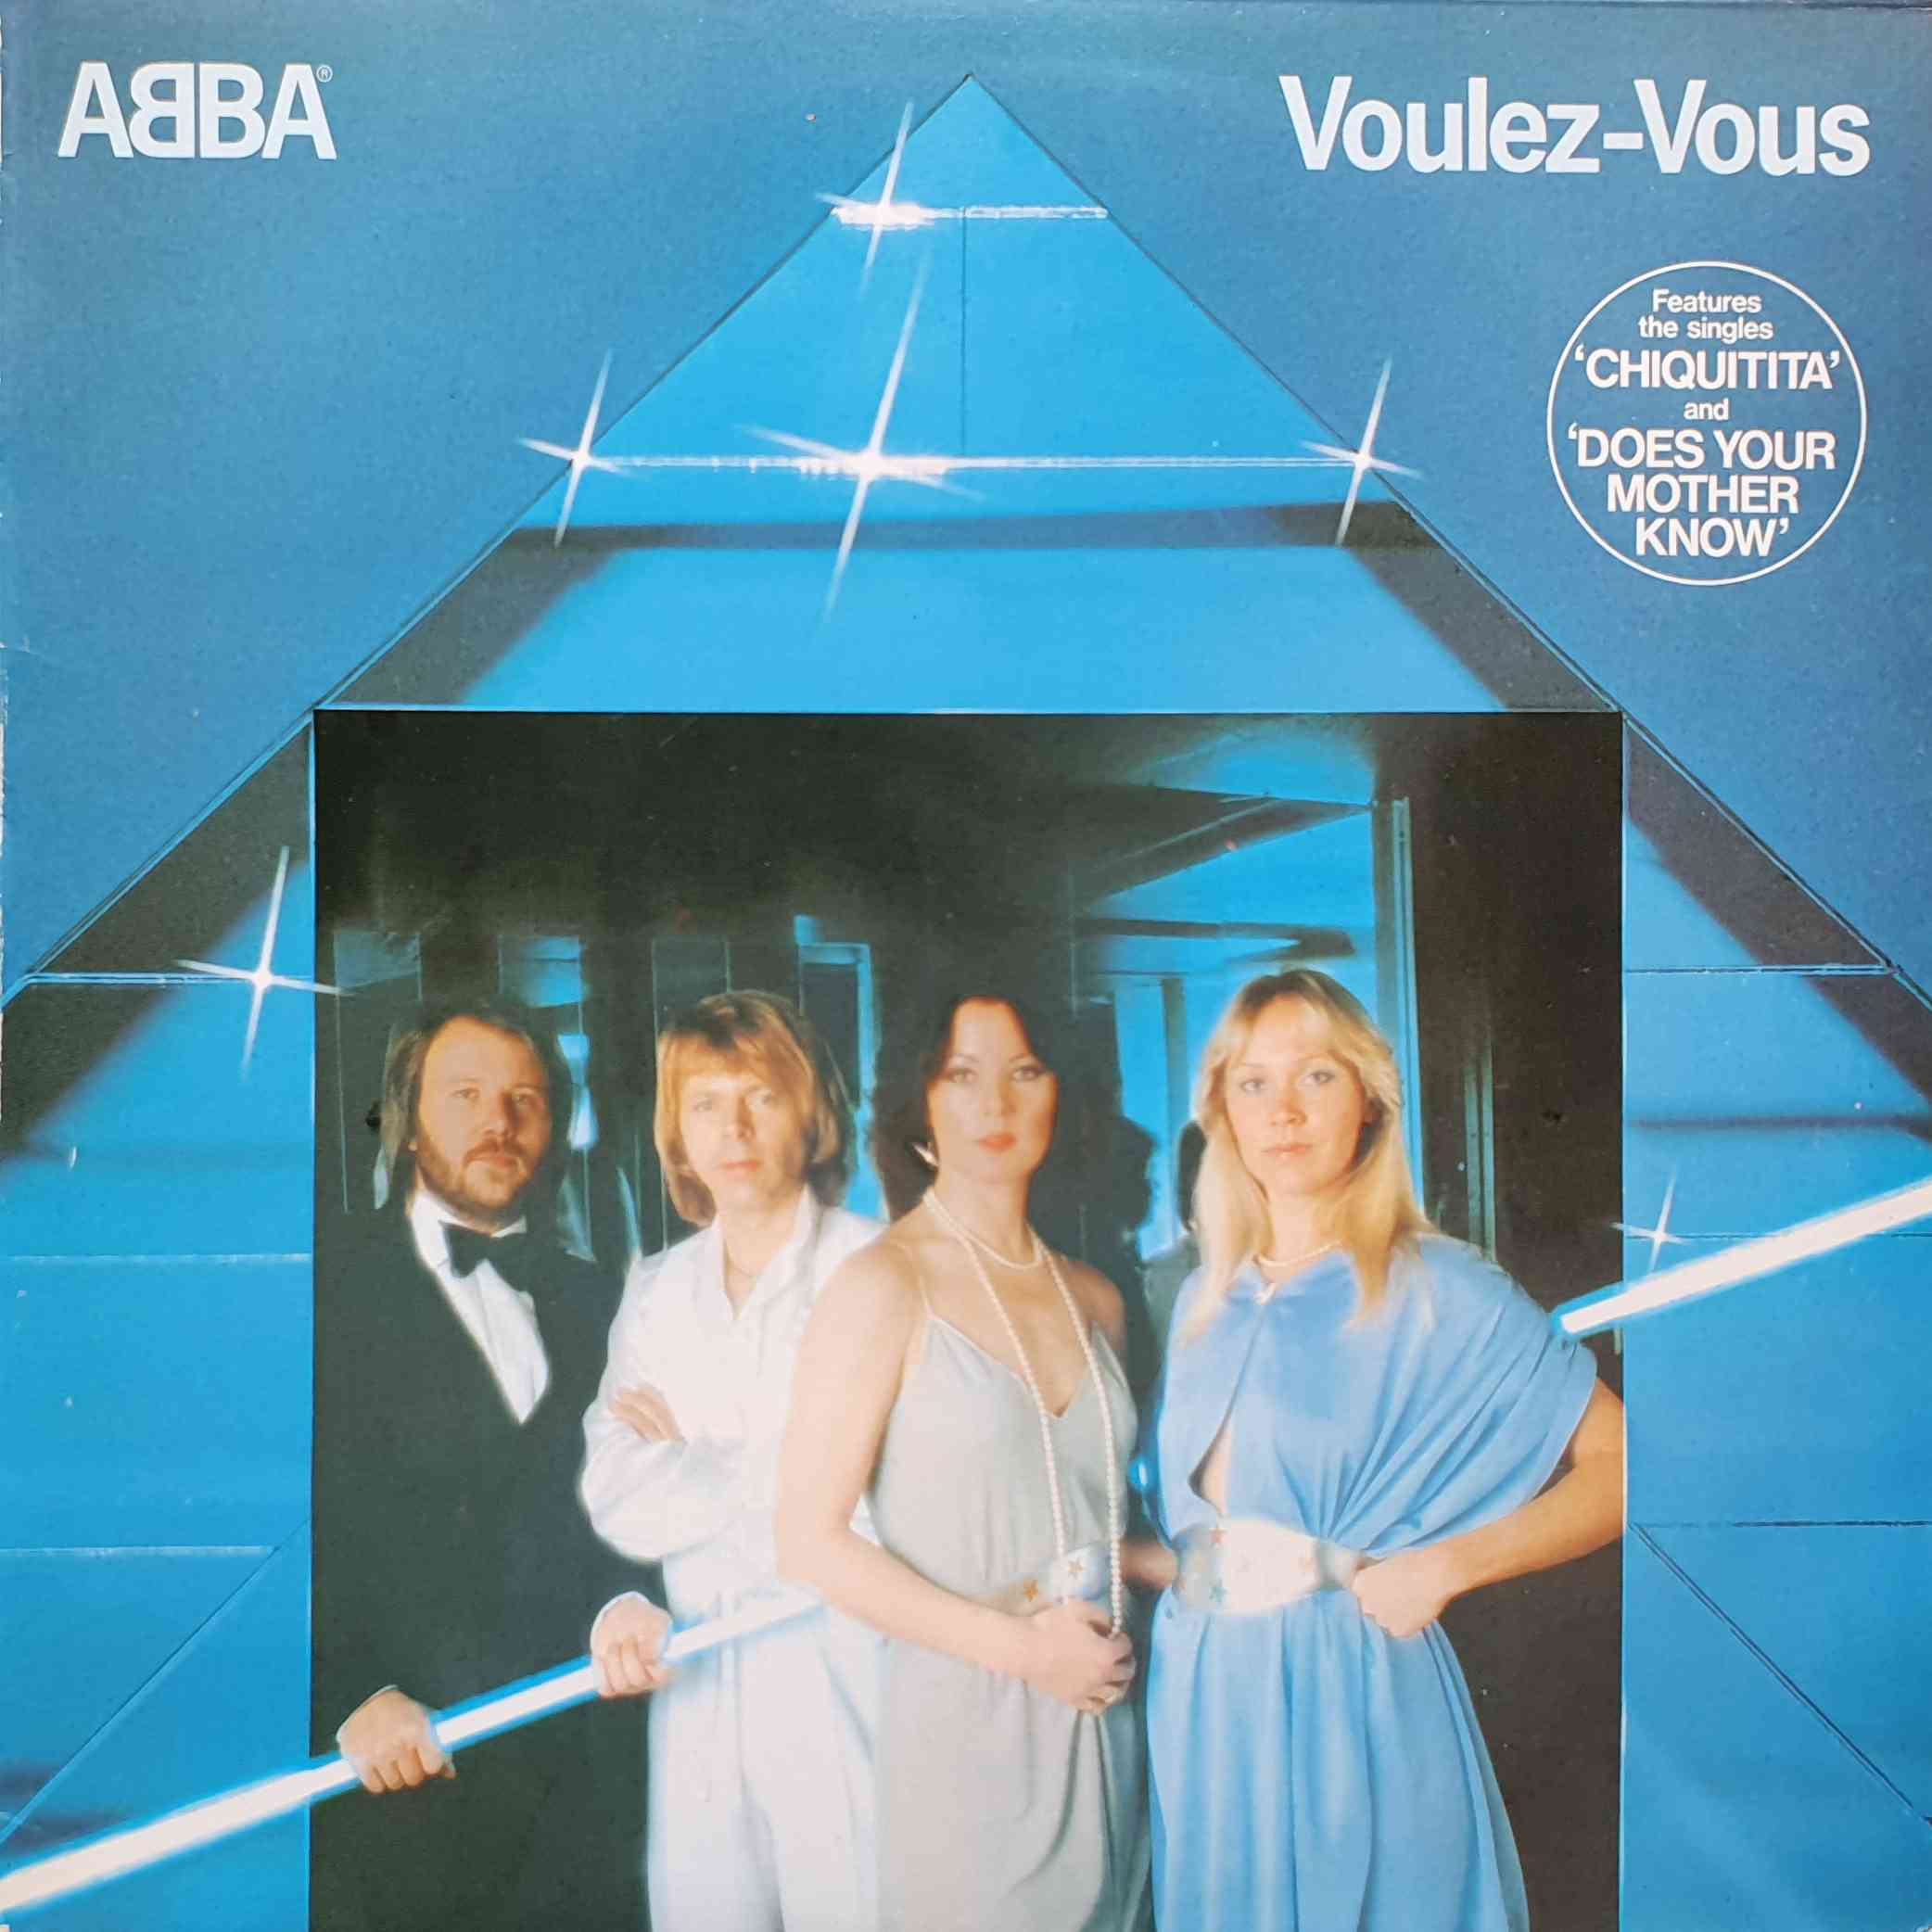 Picture of Voulez-vous by artist Abba 